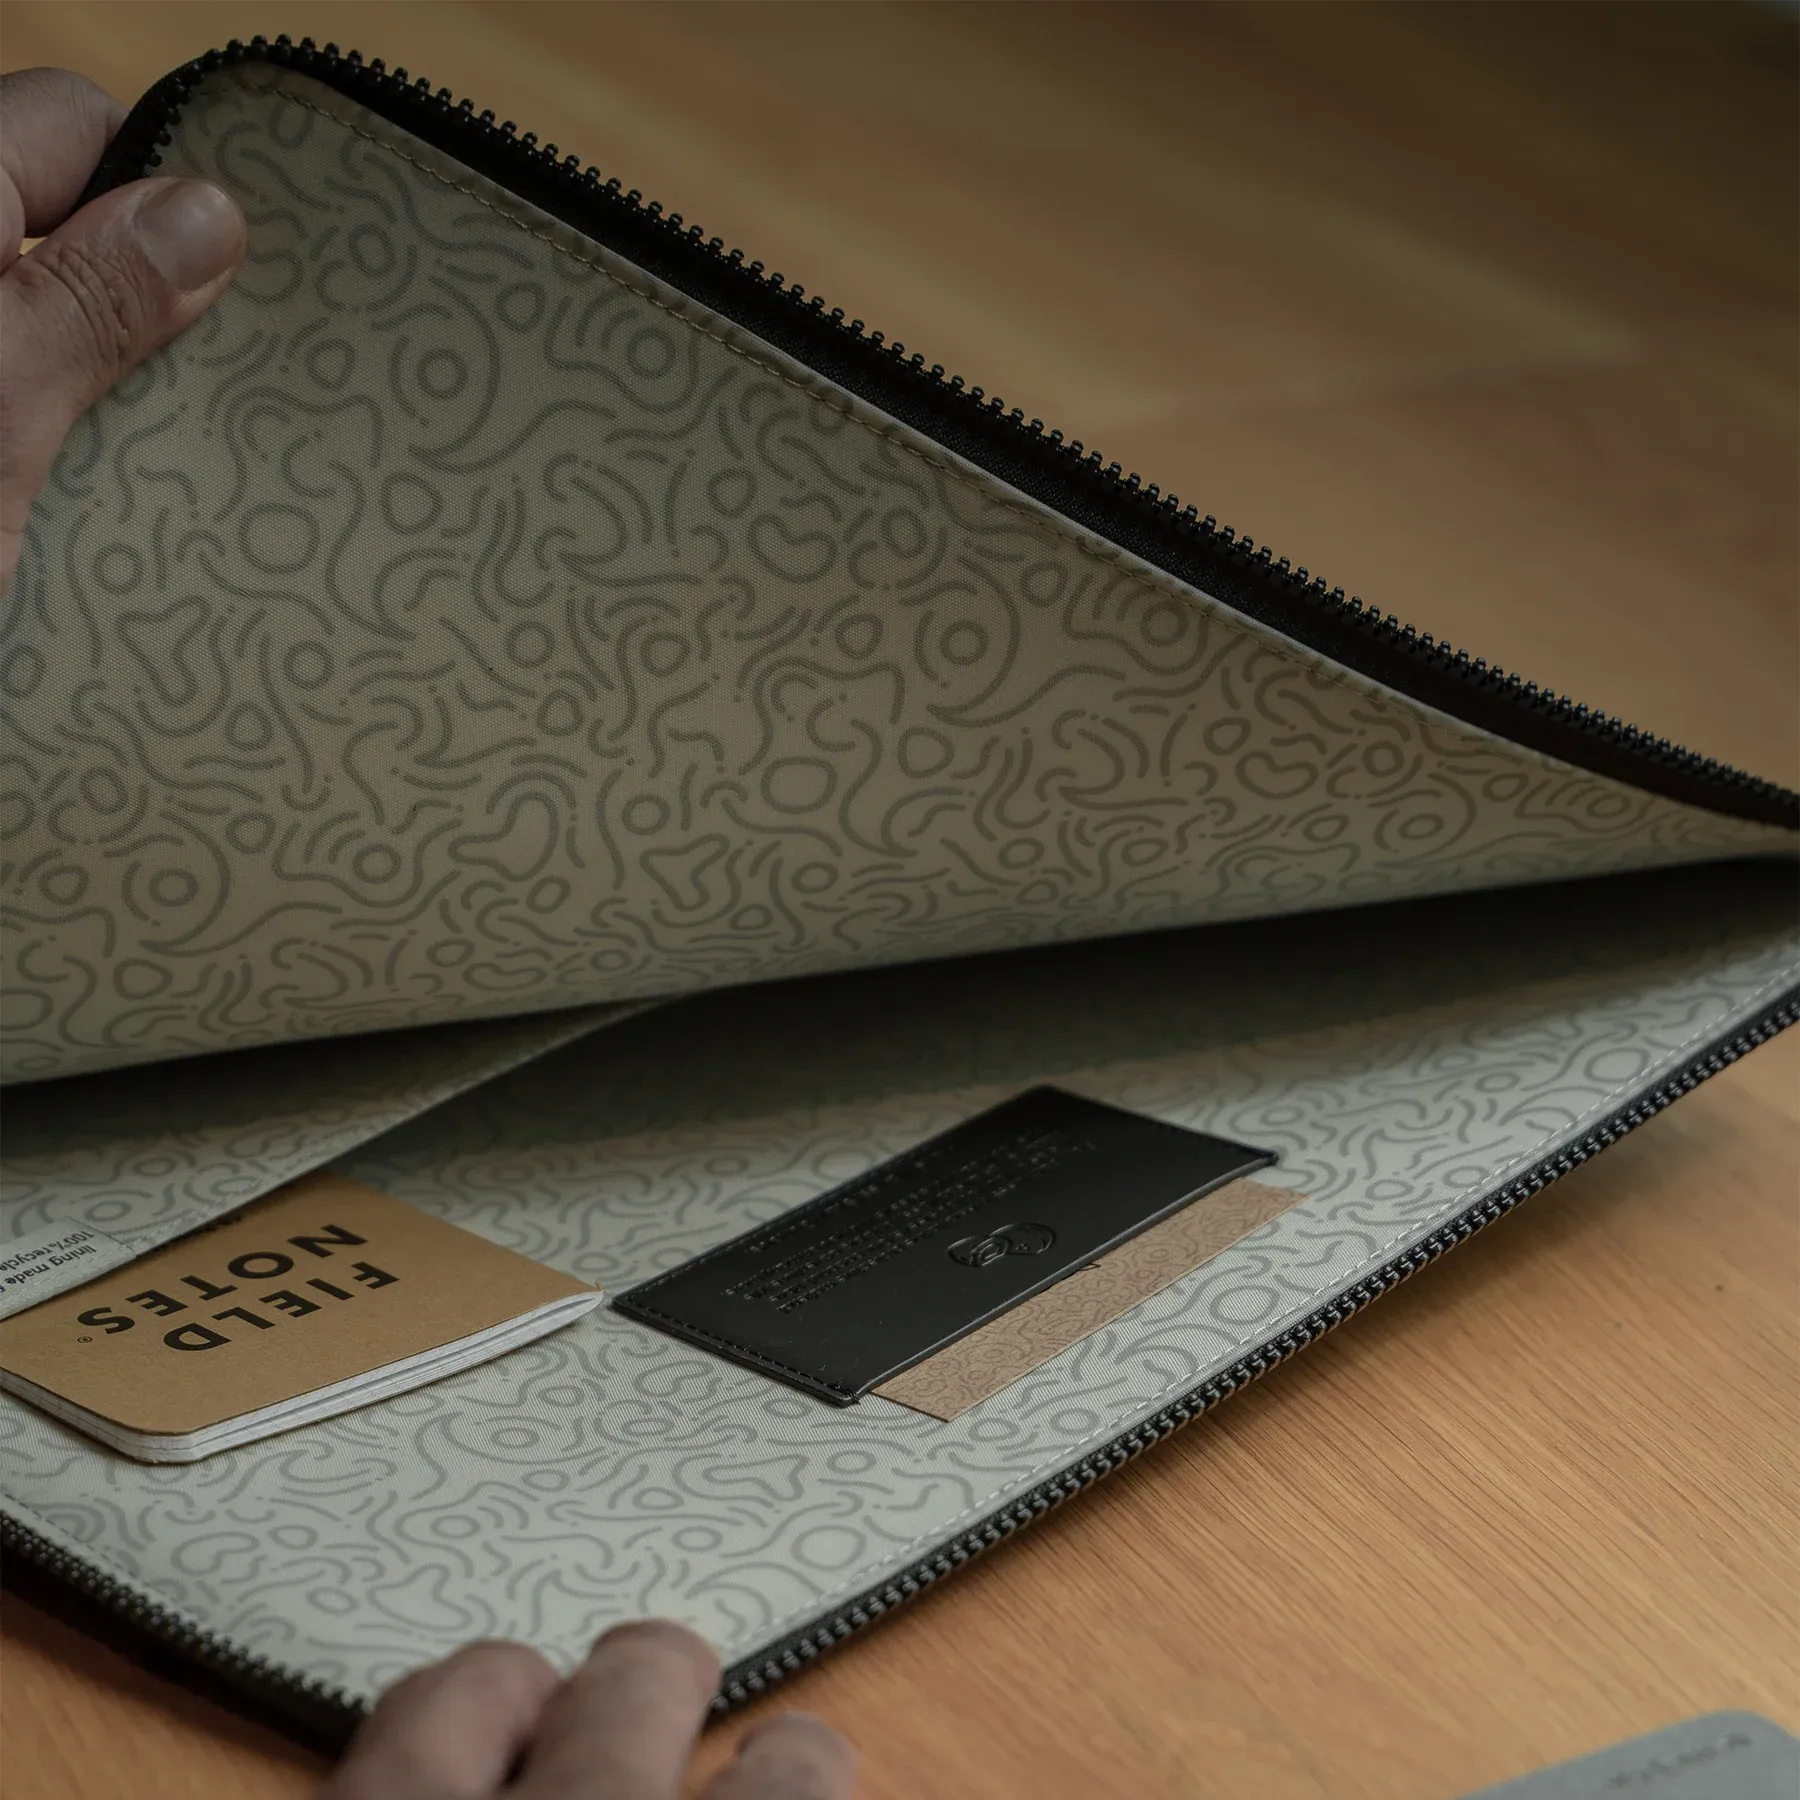 This Laptop Sleeve Will Keep Your Laptop Safe and Paperwork Organised